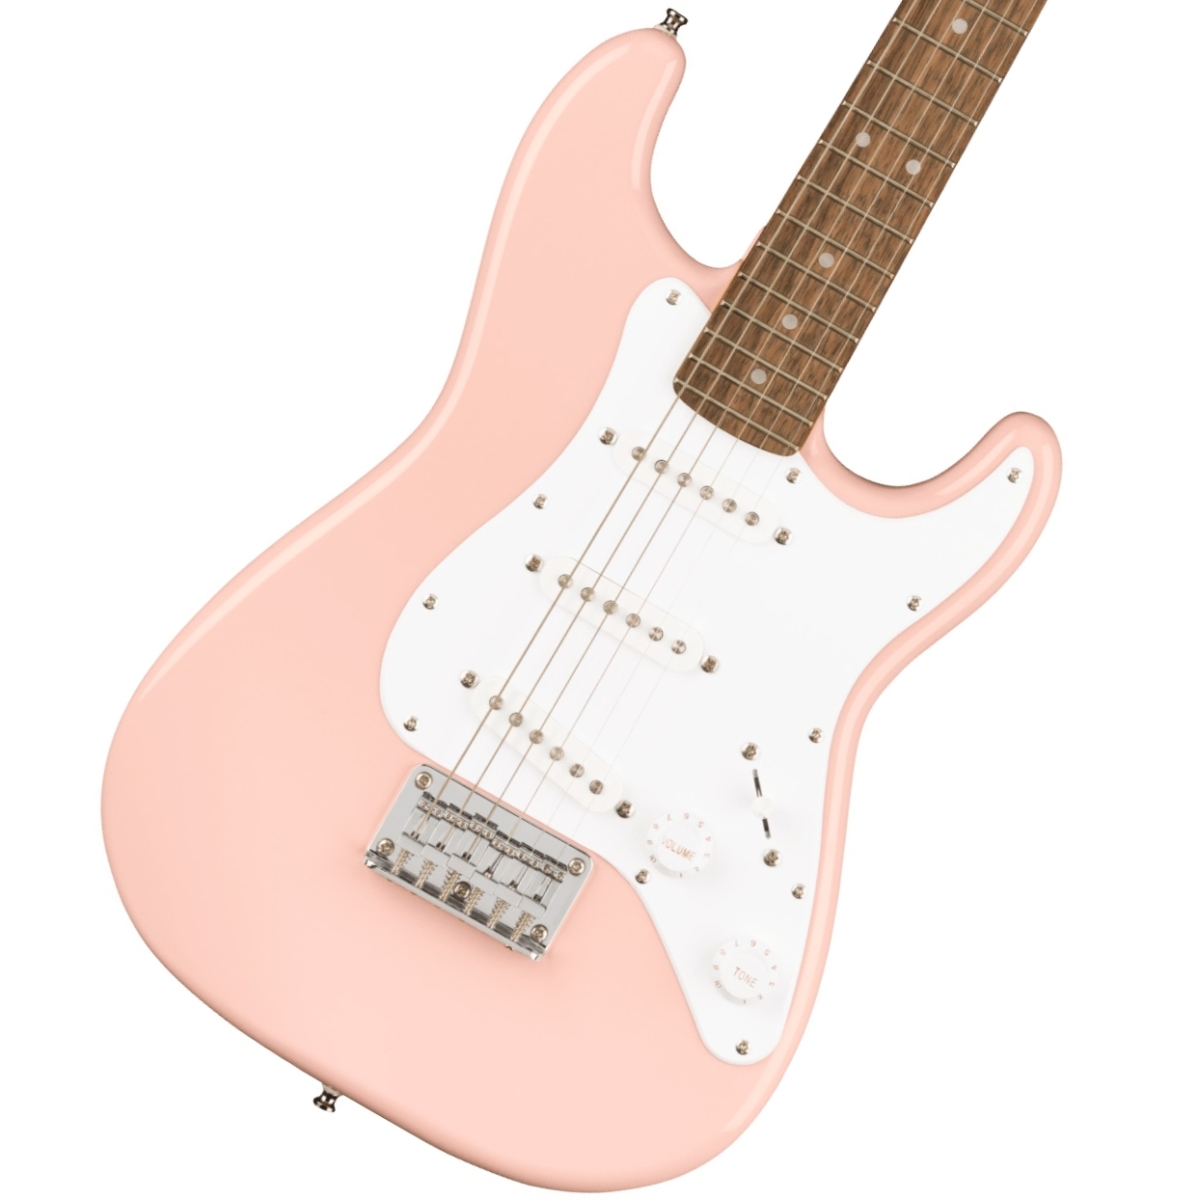 Squier by Fender / Mini Stratocaster Laurel Fingerboard Shell Pink